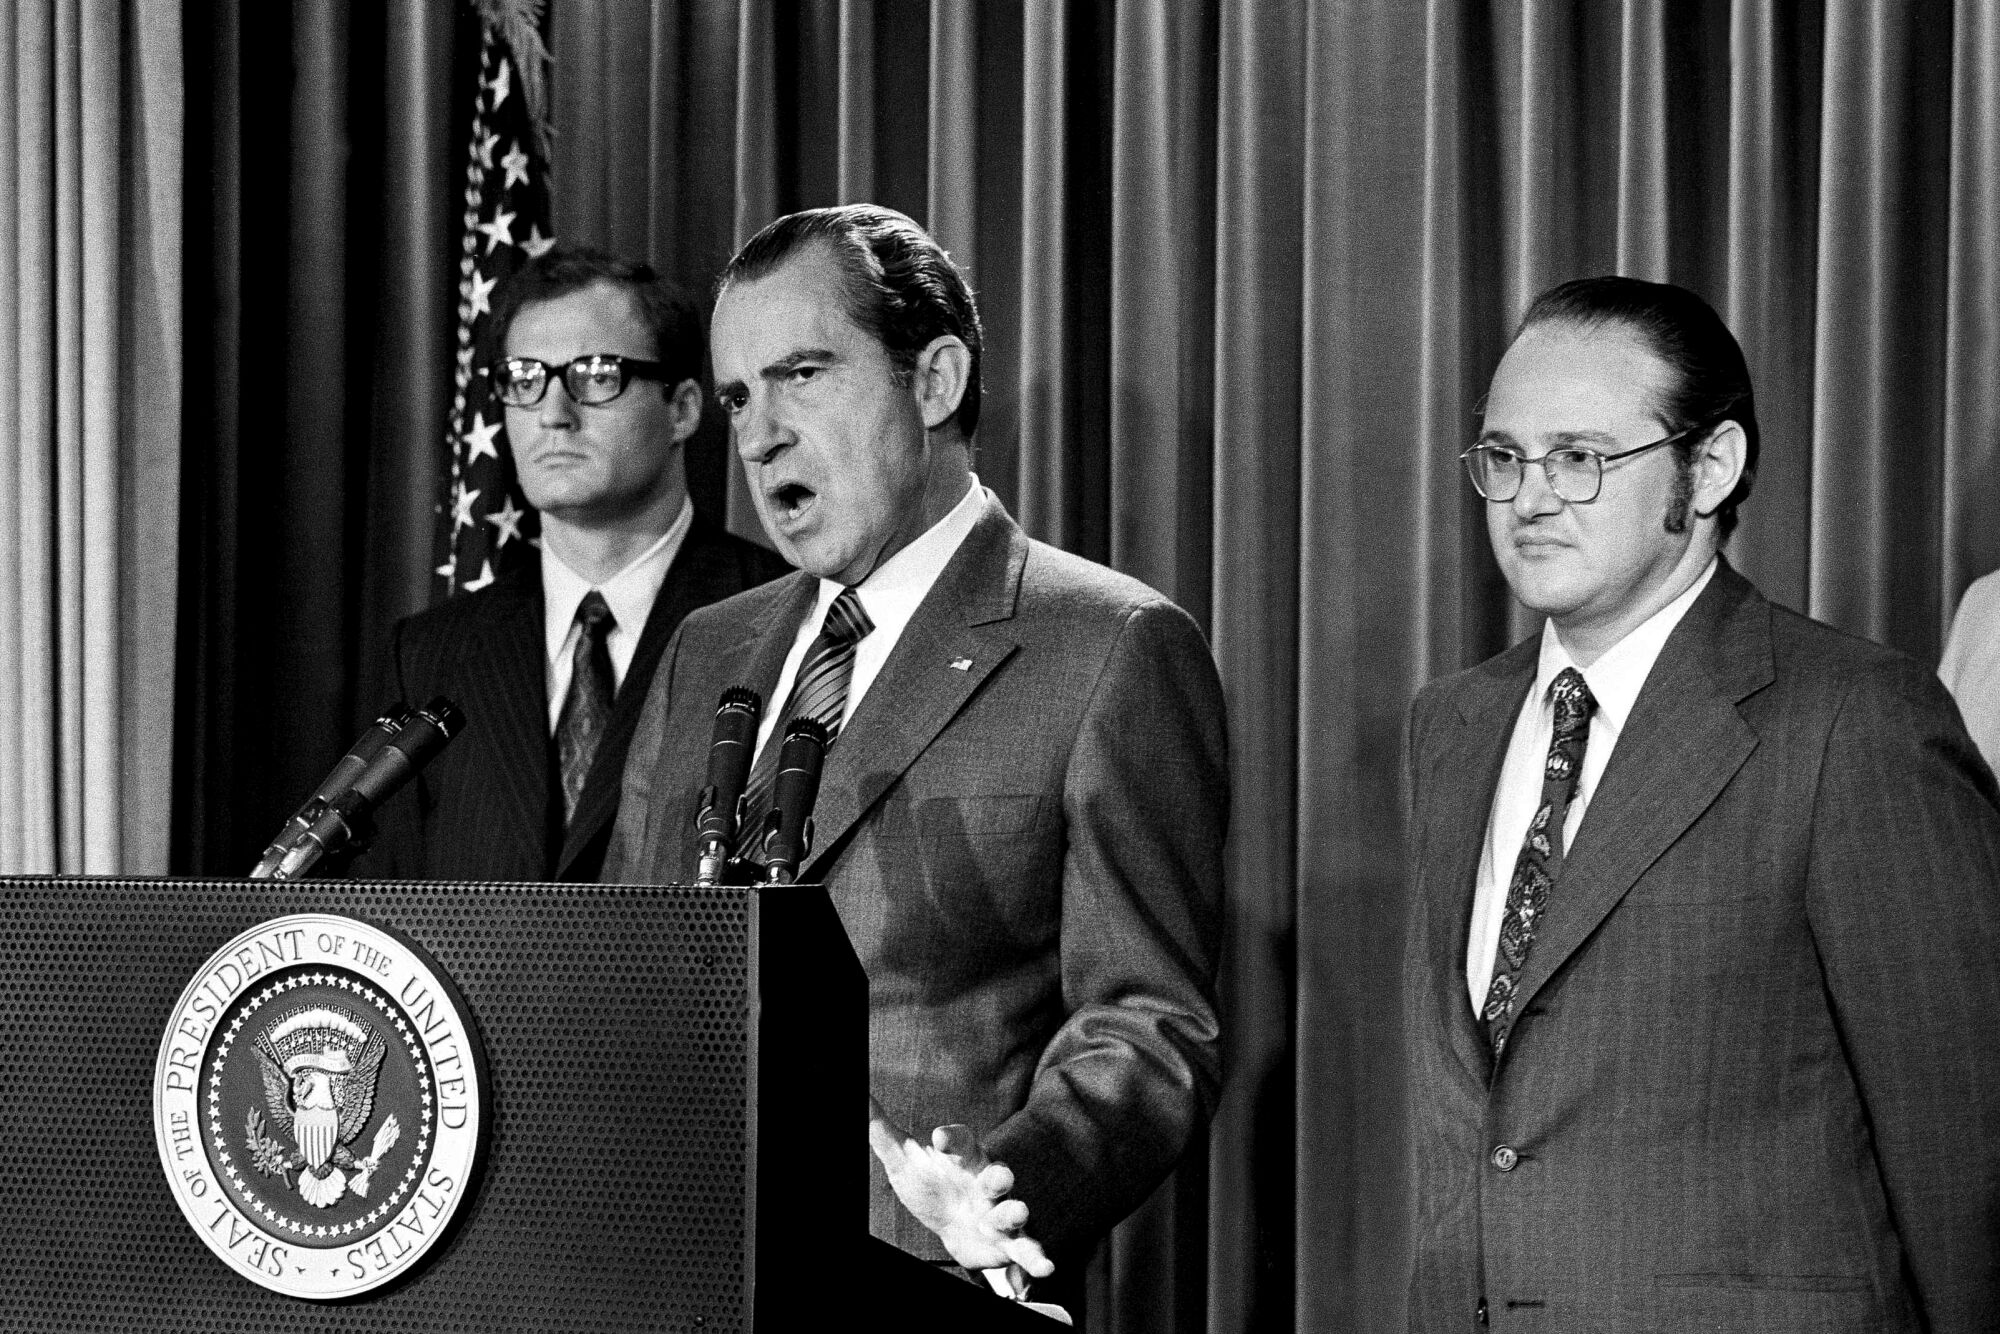 President Nixon stands at a podium, flanked by two other men